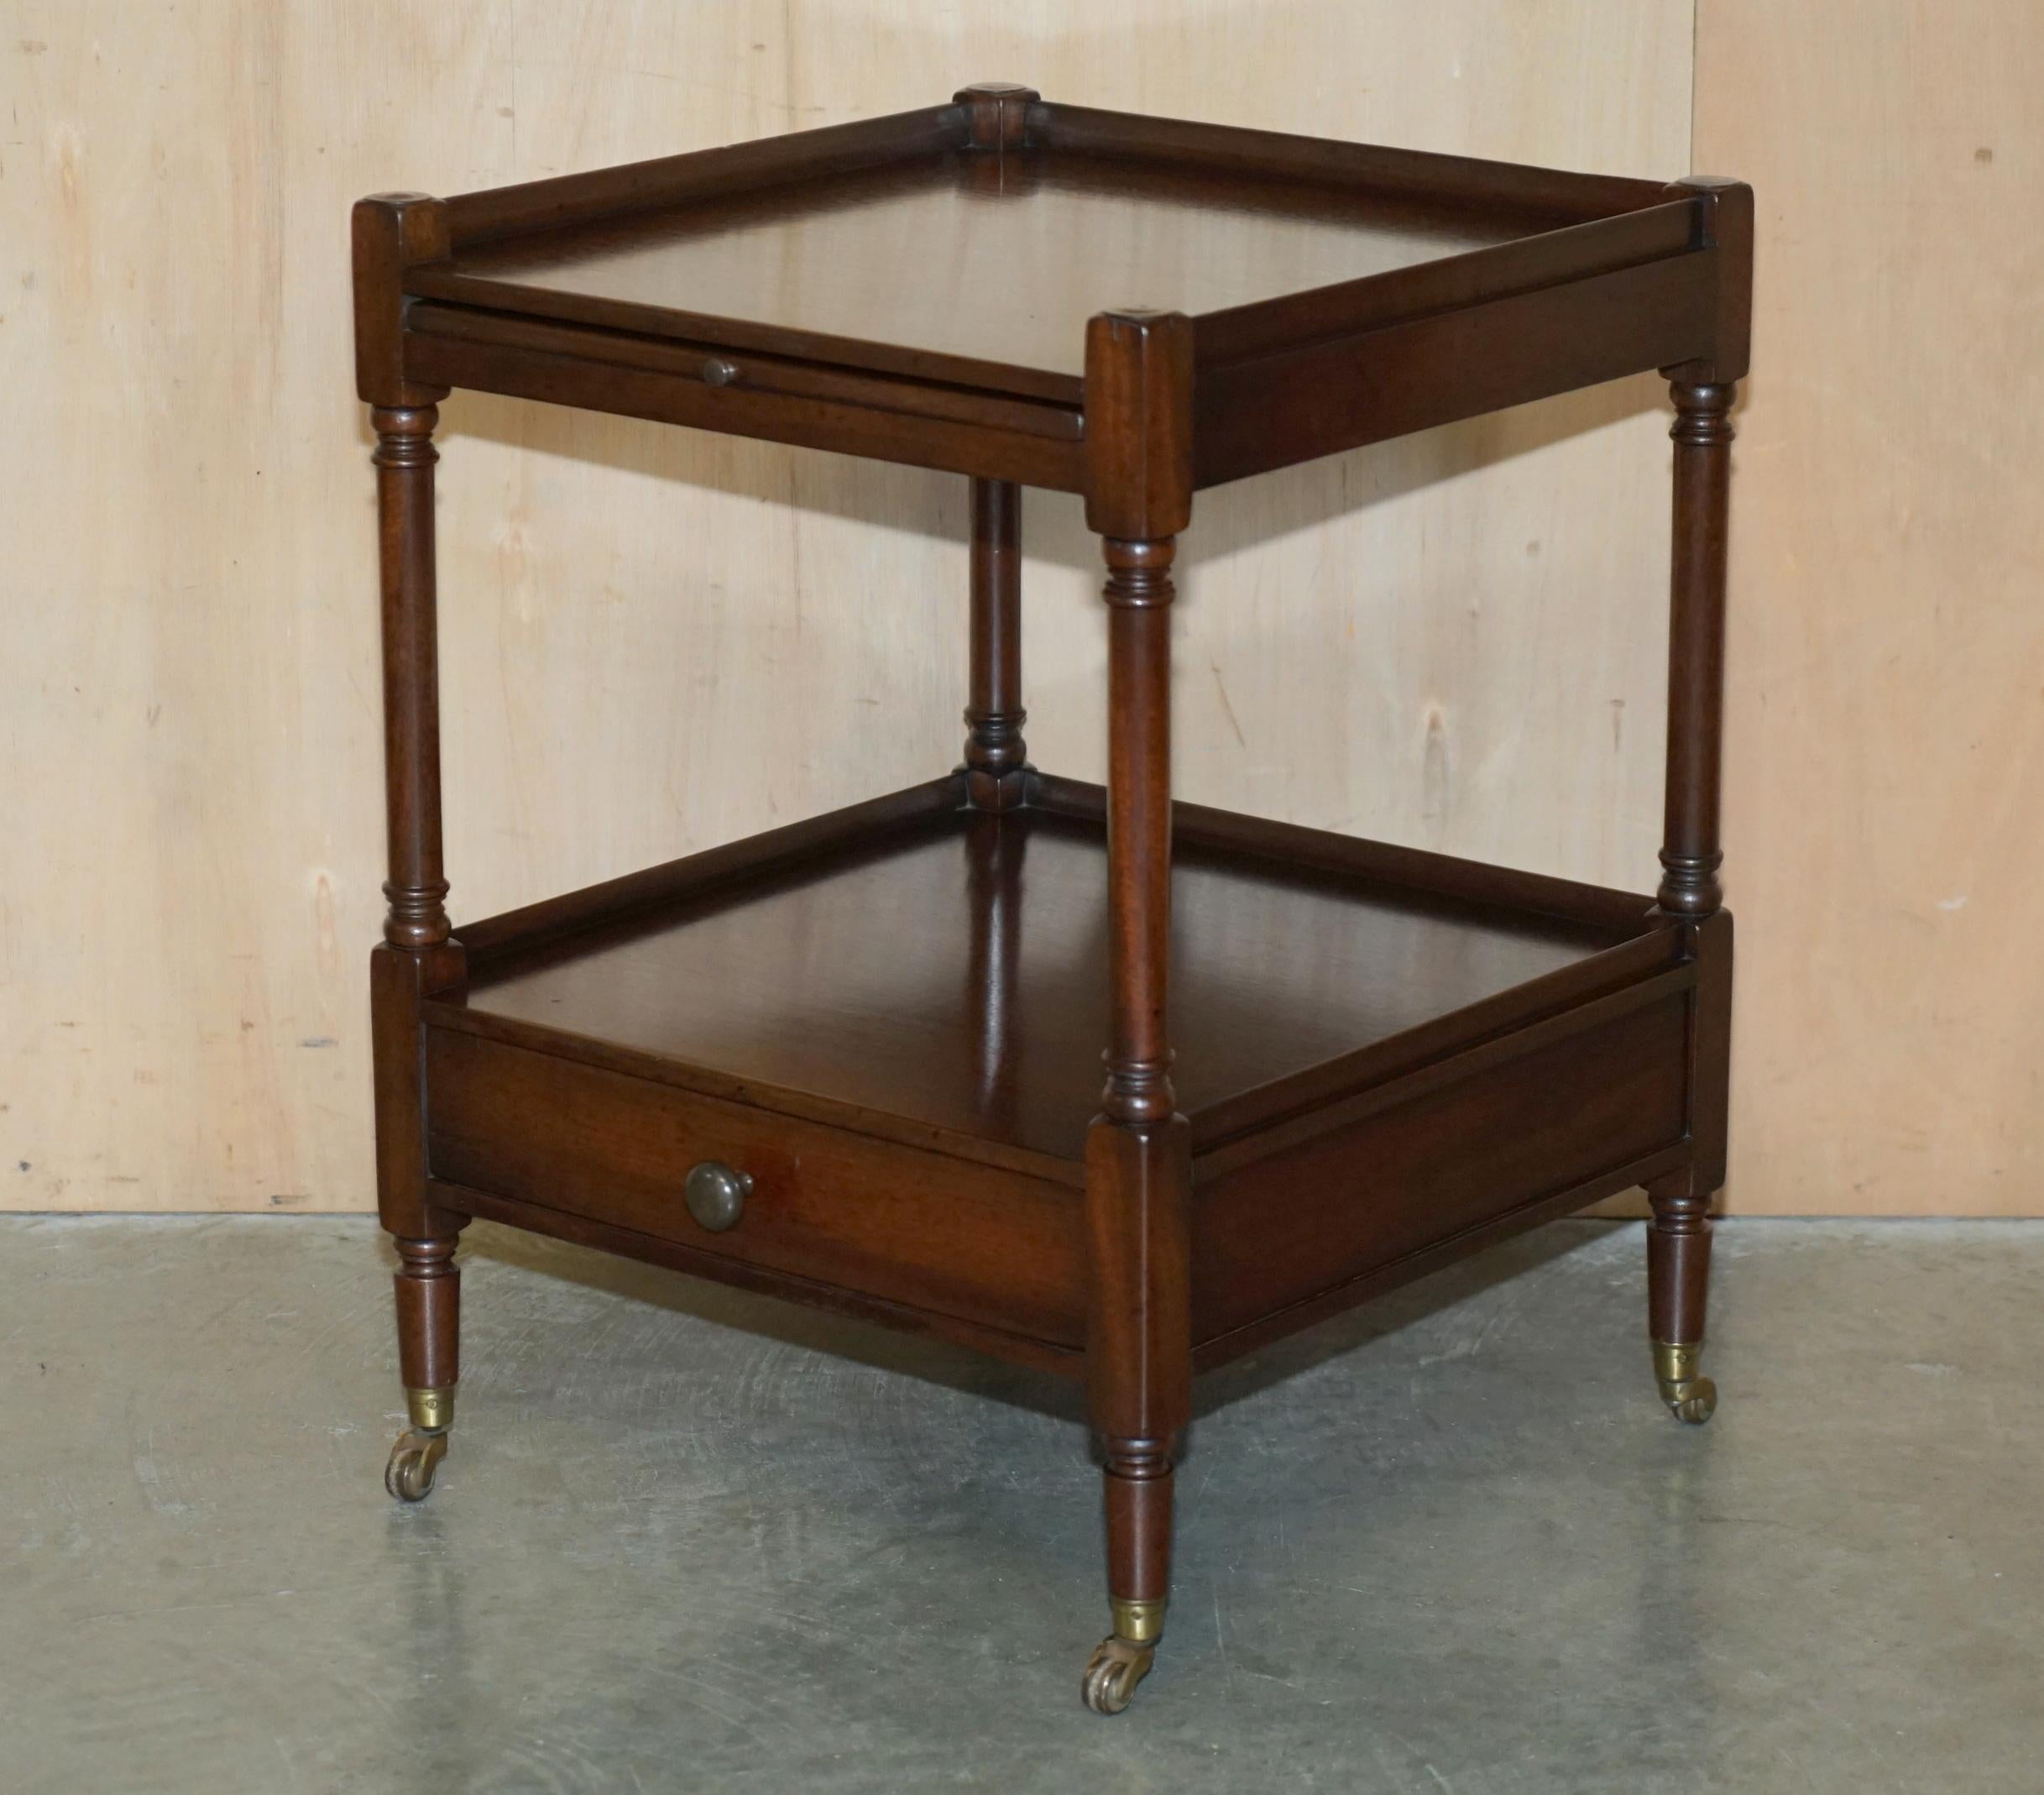 English PAIR OF STUNNiNG TWO TIERED SIDE TABLES WITH BROWN LEATHER BUTLERS SERVING TRAYS